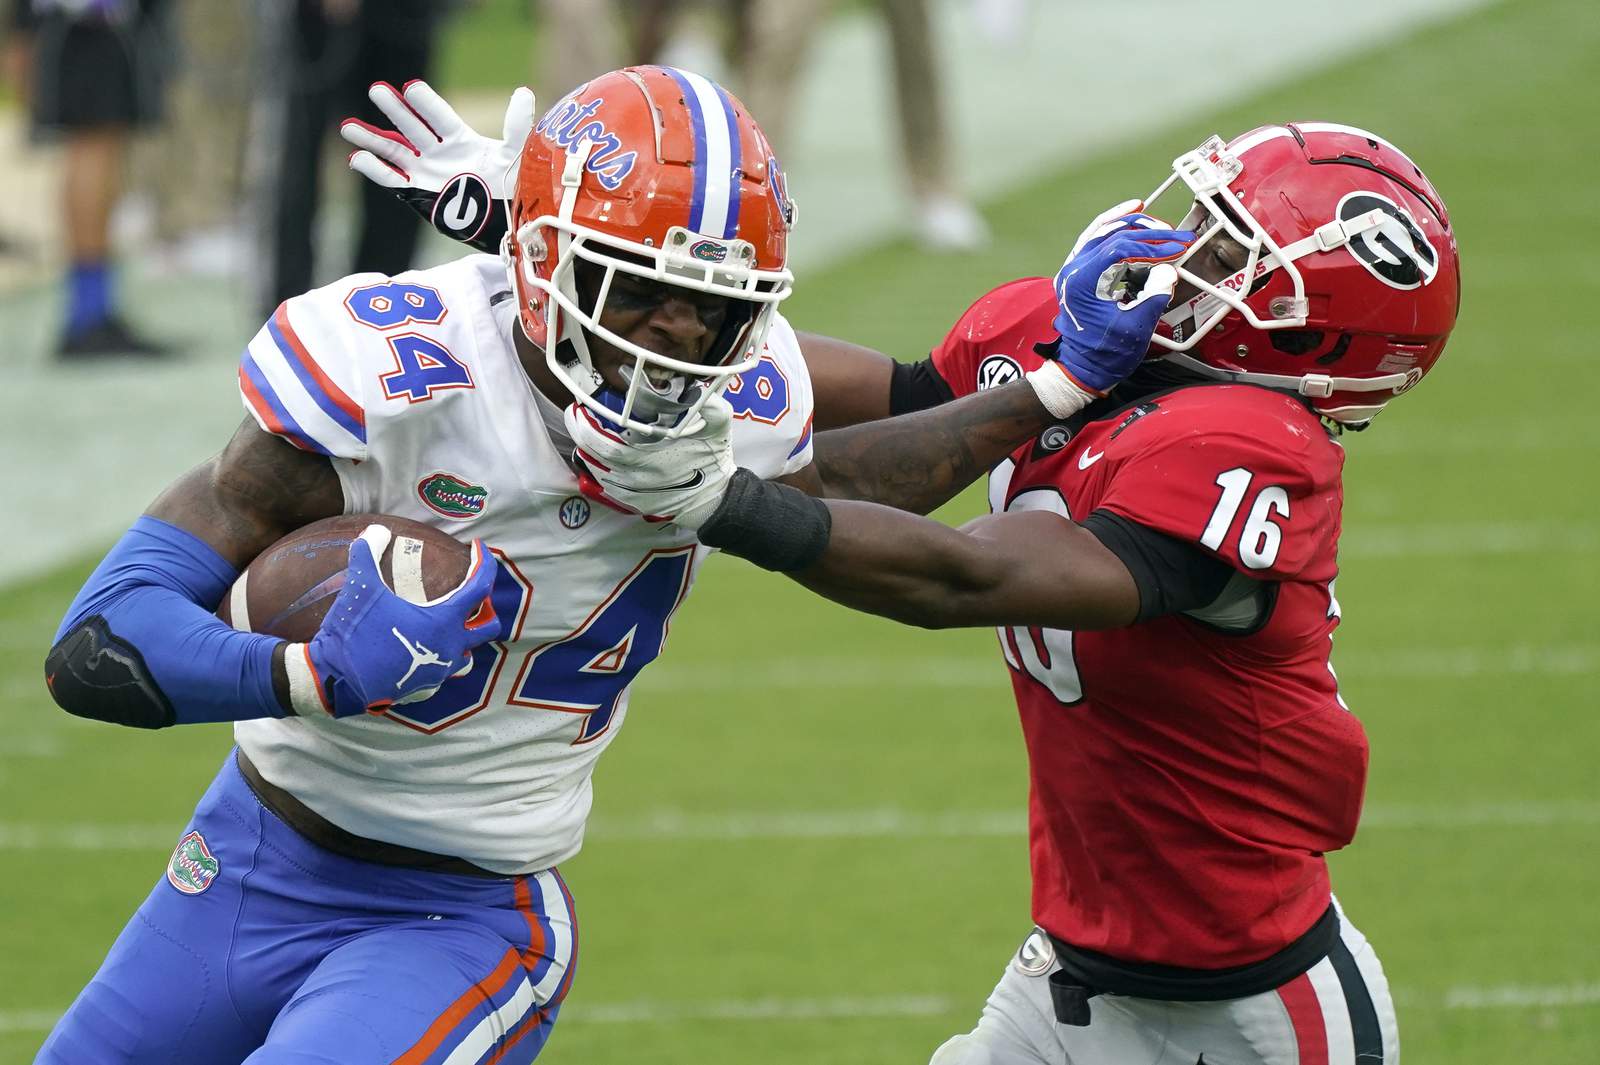 Smith, Pitts are the real stars of SEC's Alabama, Florida